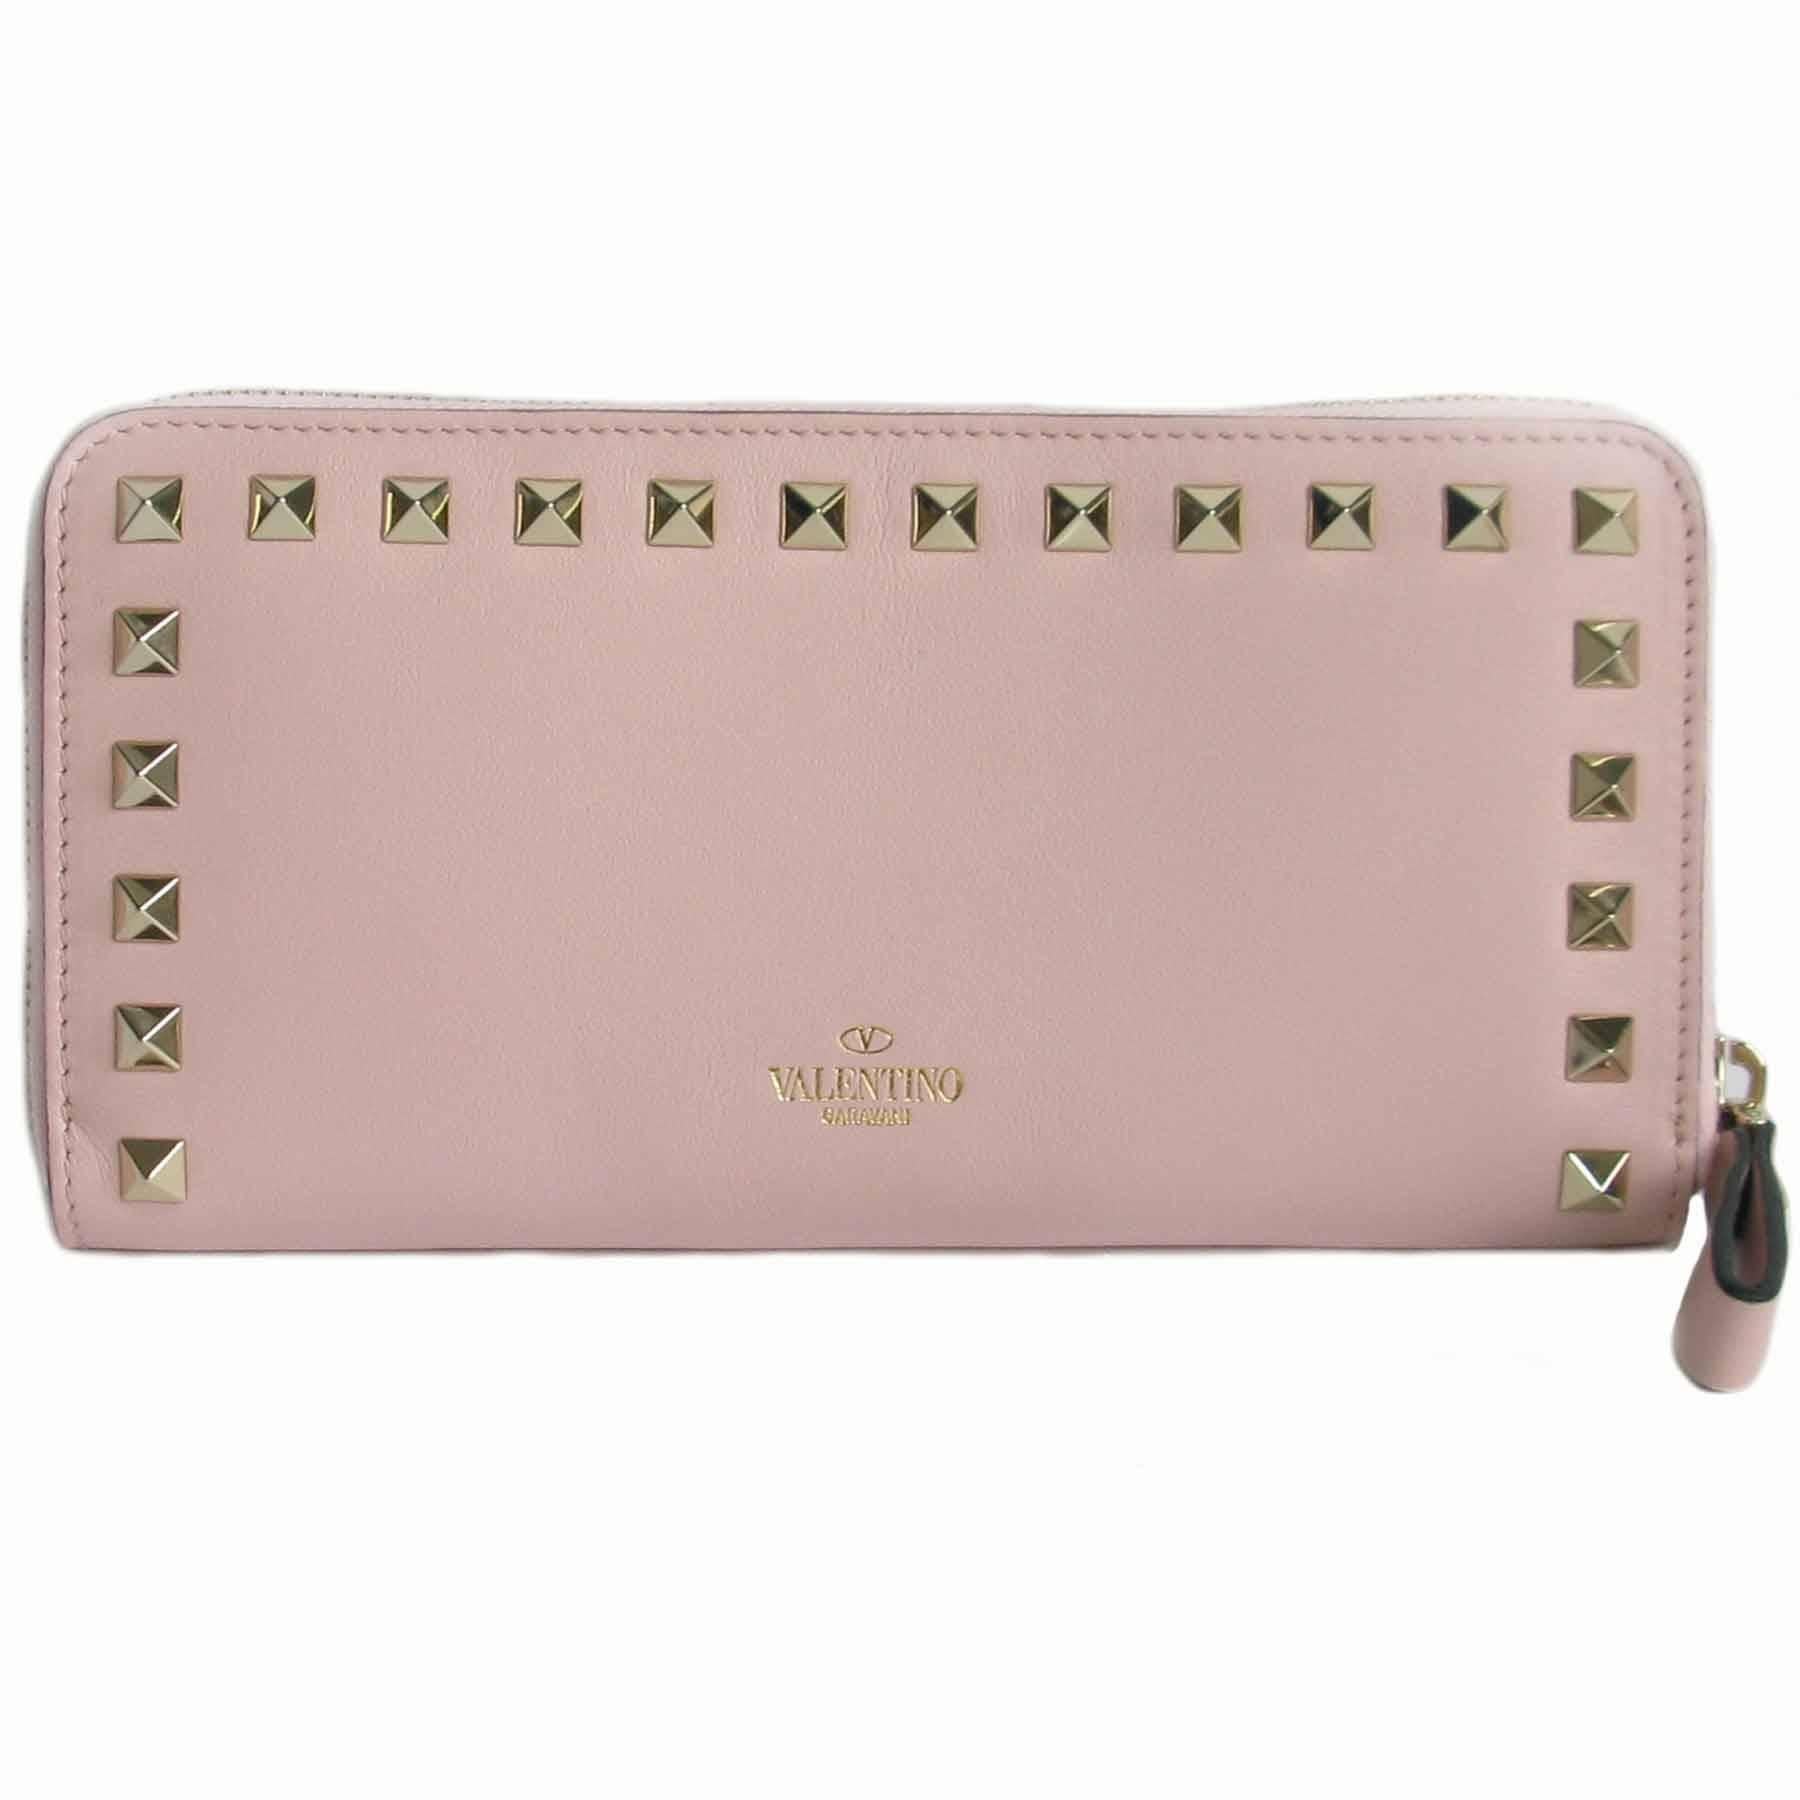 VALENTINO 'Rockstud' Wallet in Pink Leather and Gilded Metal Studs